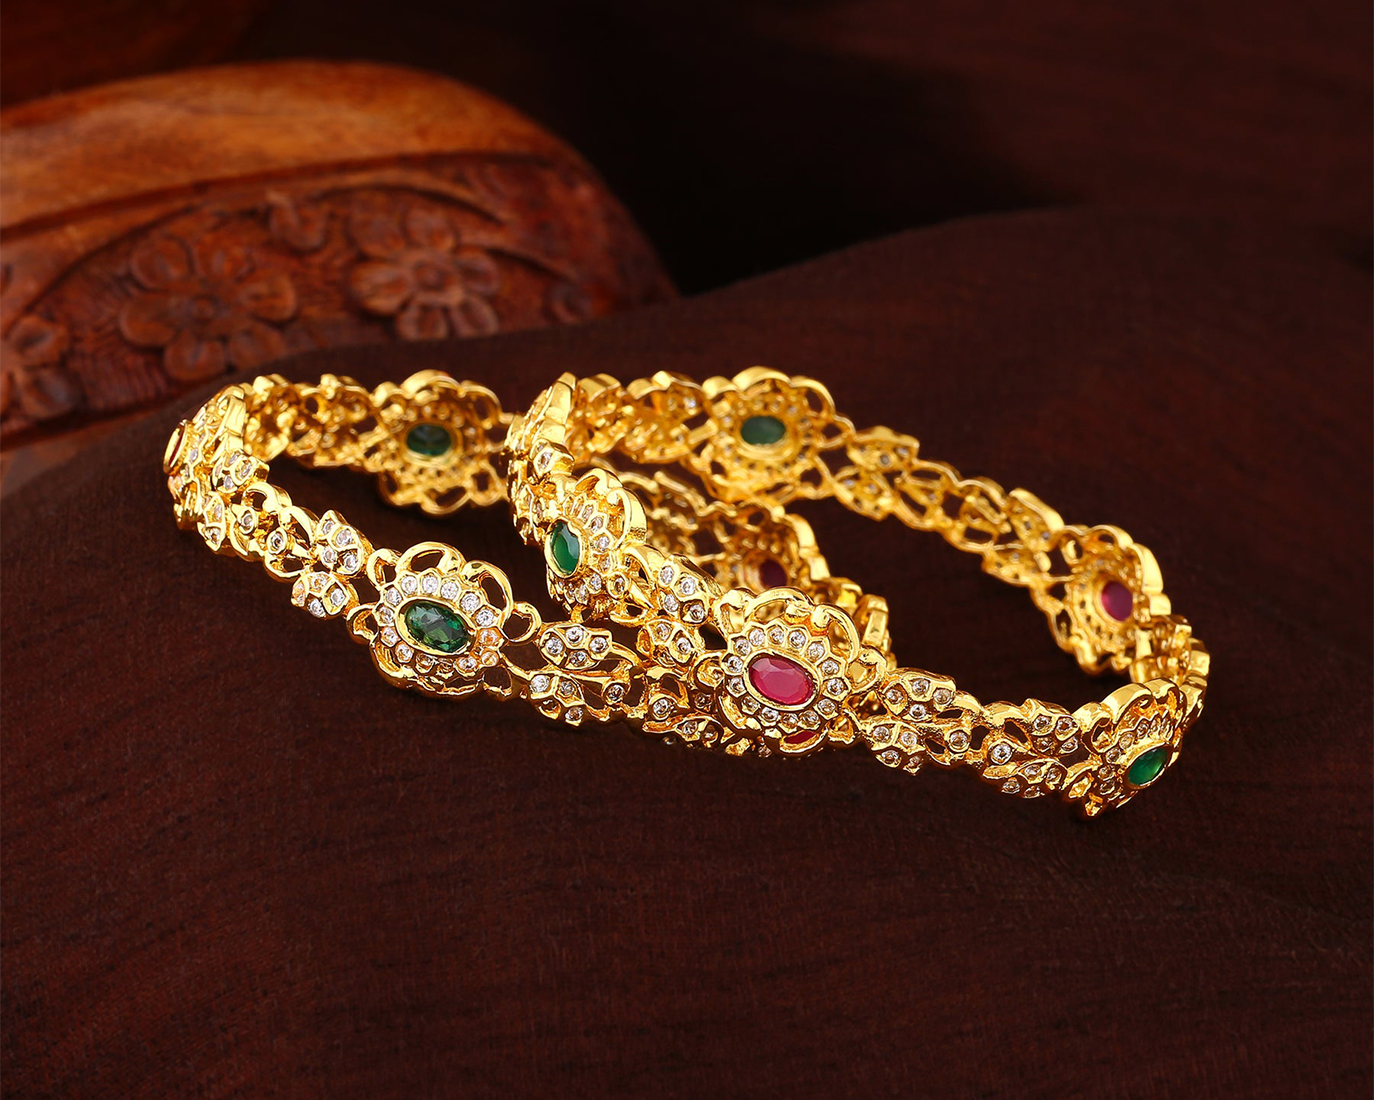 5 Traditional Indian Bangles That Are Perfect For Your Main Event